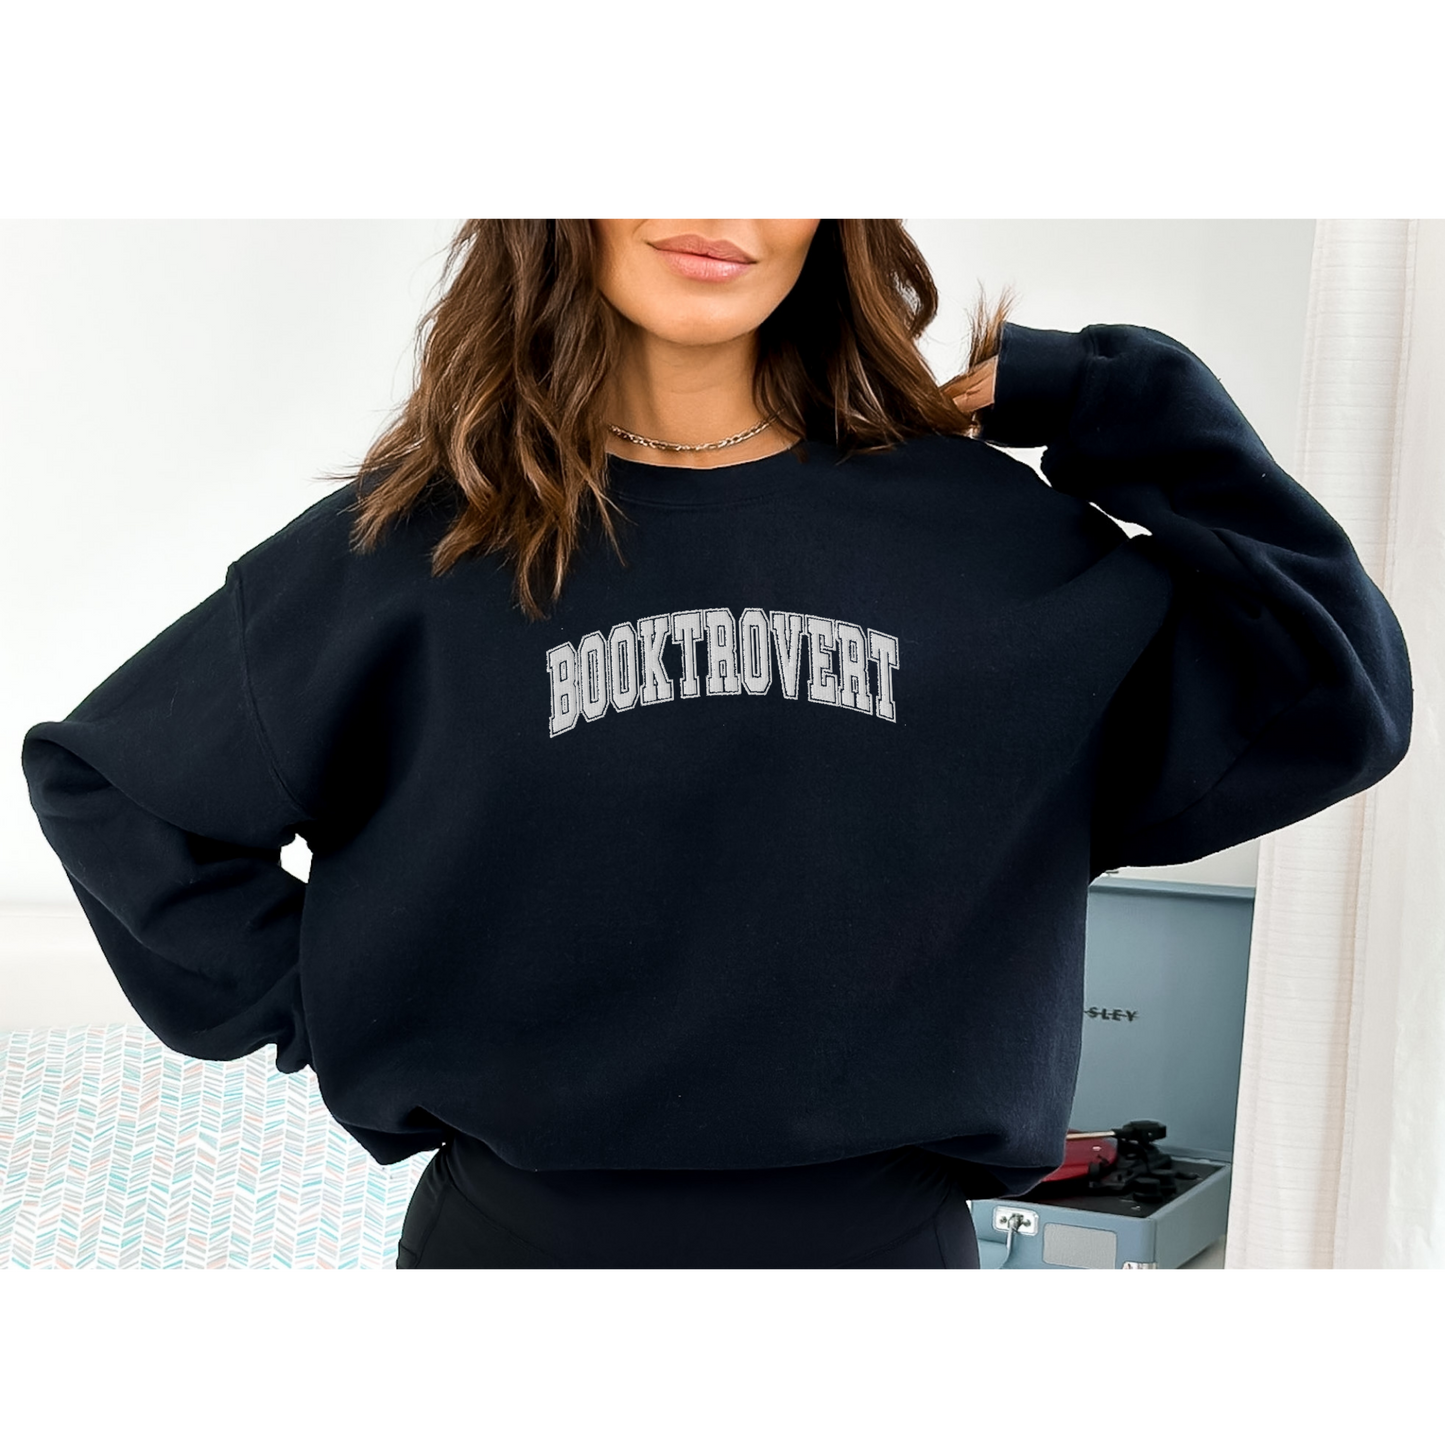 Wrap yourself in literary charm with our "Booktrovert" Embroidered Sweatshirt.